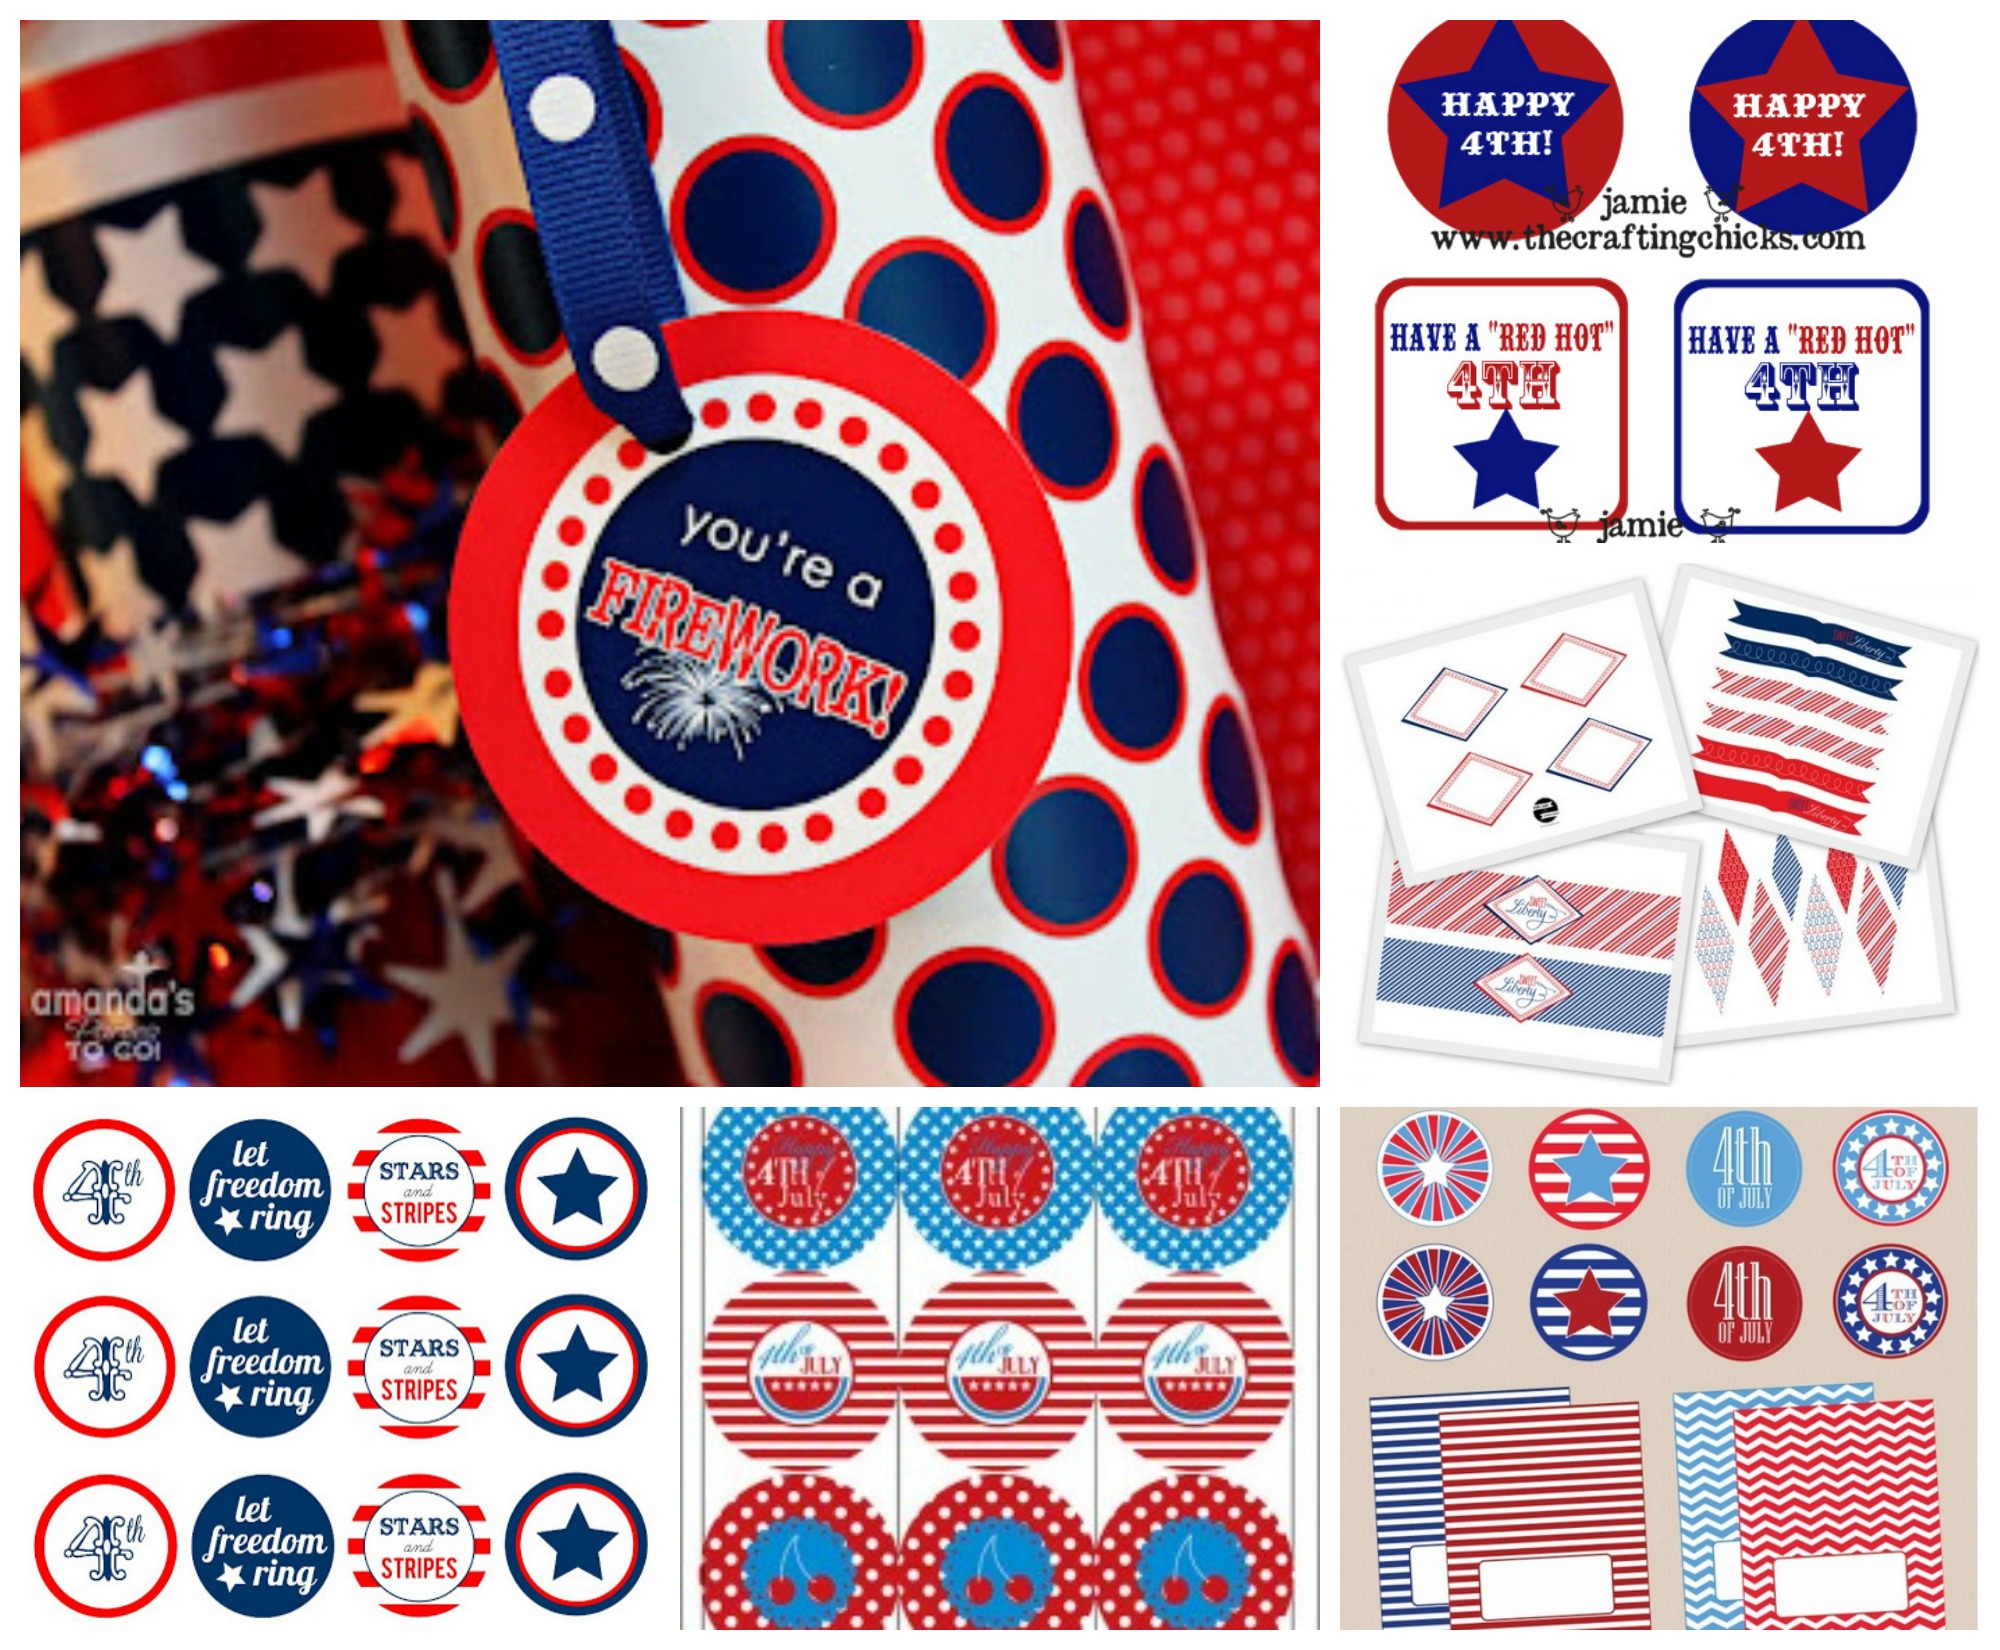 July 4th Free Printable Gift Tags